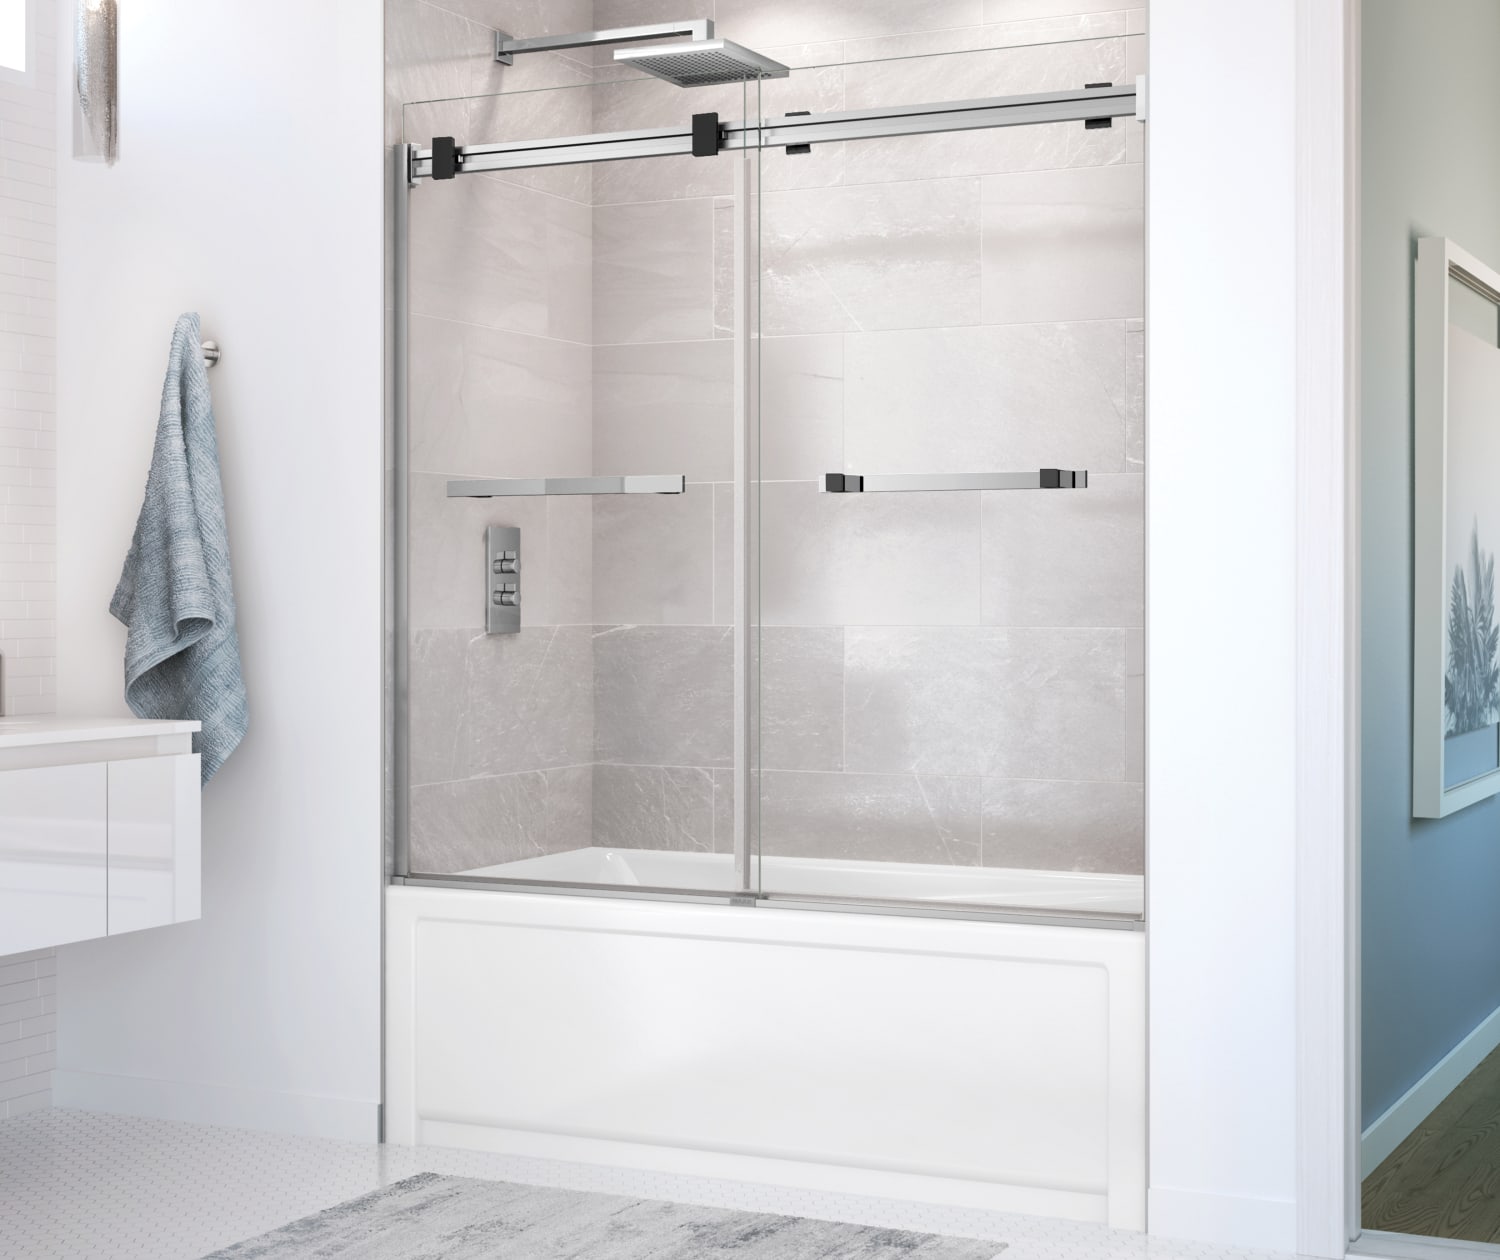 Duel 56 59 X 55 ½ X 59 In 8 Mm Bypass Tub Door For Alcove Installation With Clear Glass In